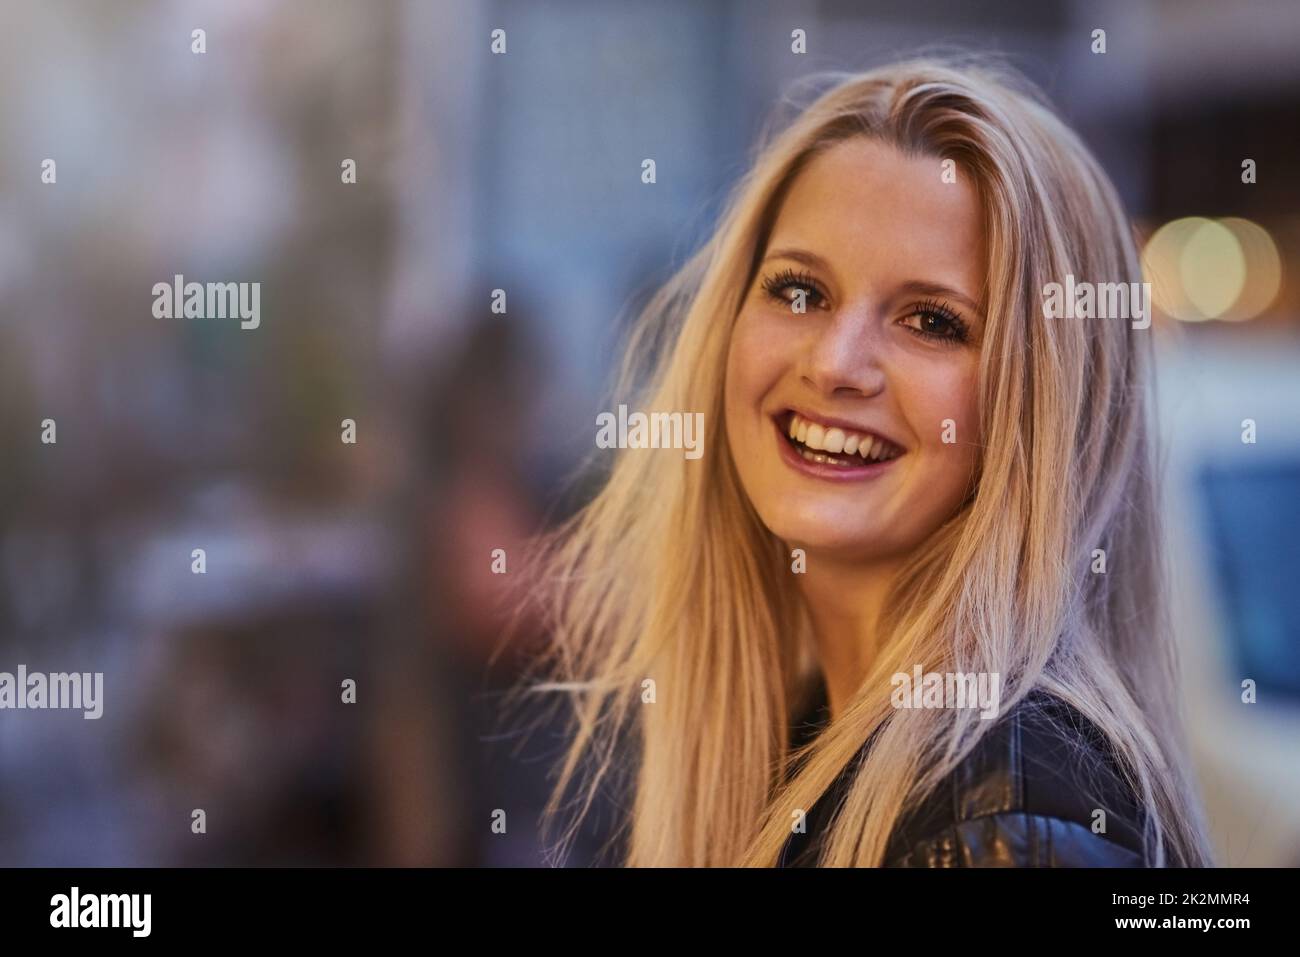 Im a city girl all the way. Shot of a confident young woman out and about in the city at night. Stock Photo